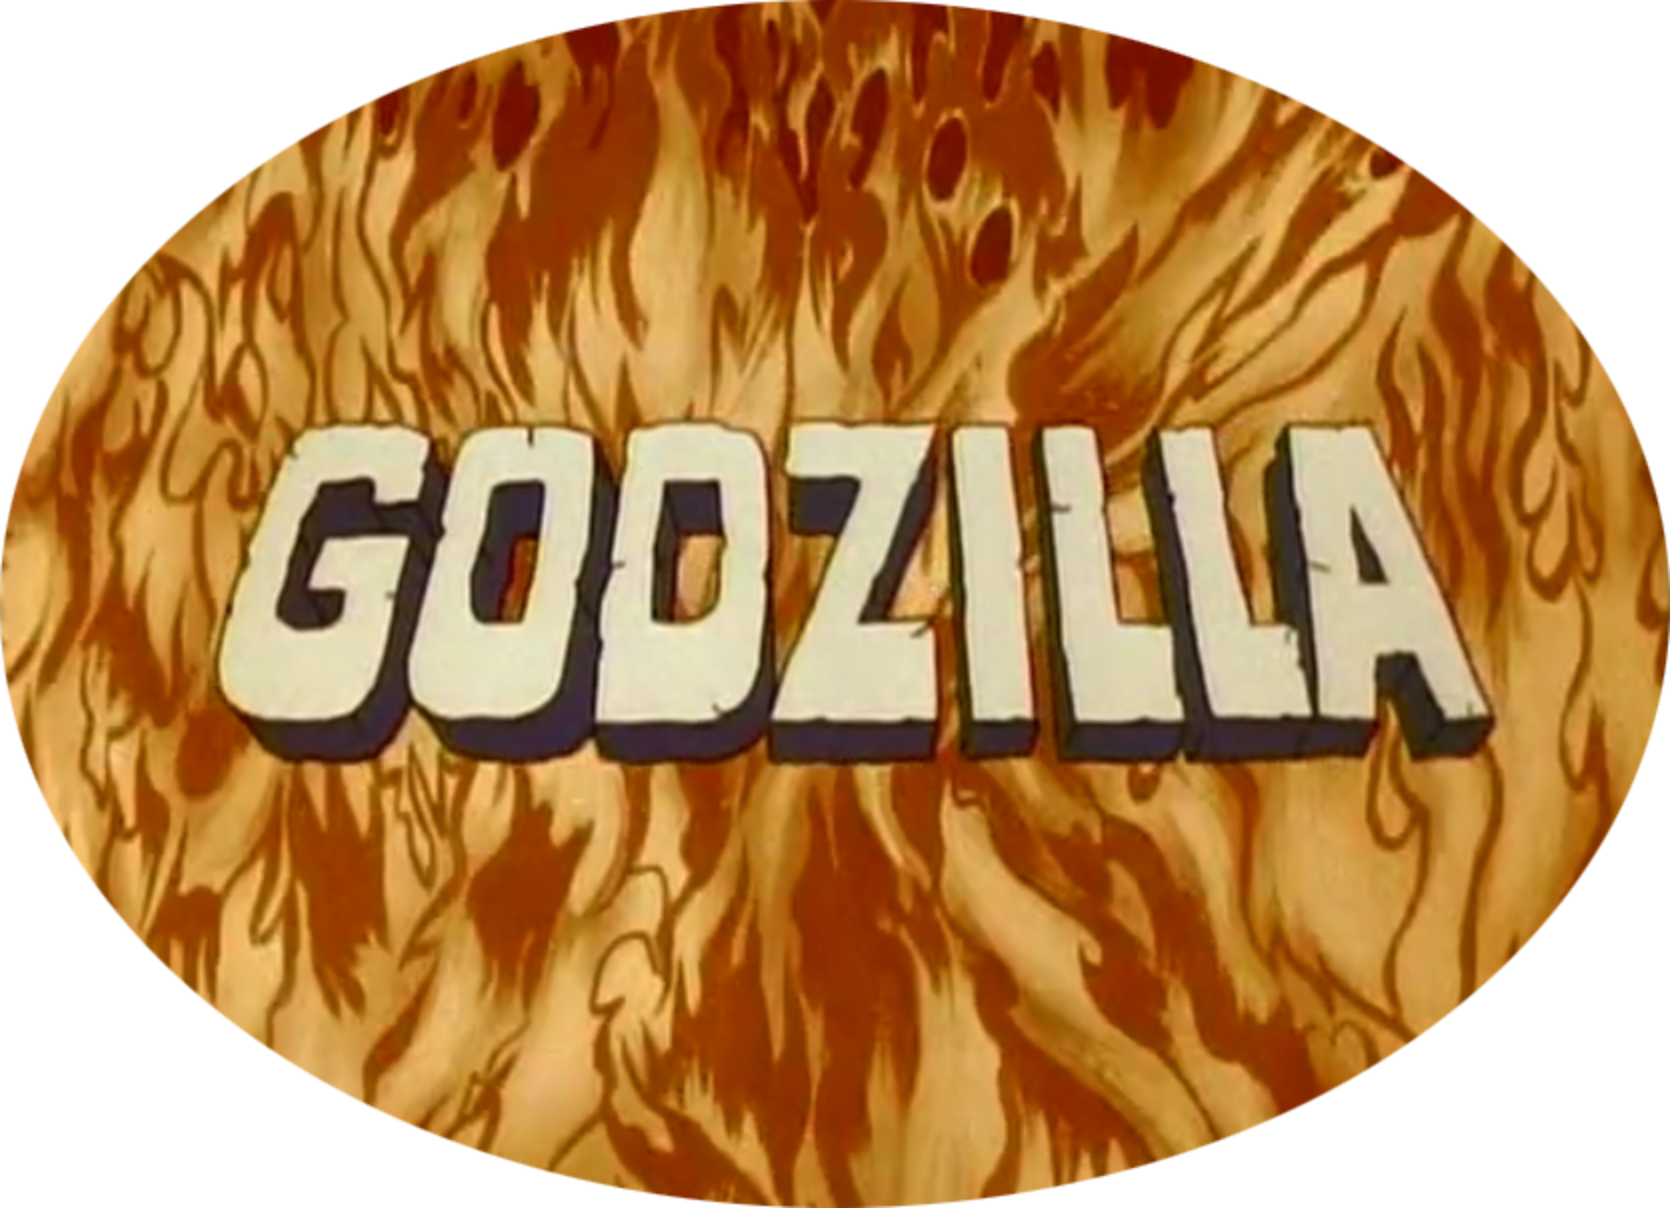 Godzilla: The Animated Series Complete 1978-1981 (3 DVDs Box Set)